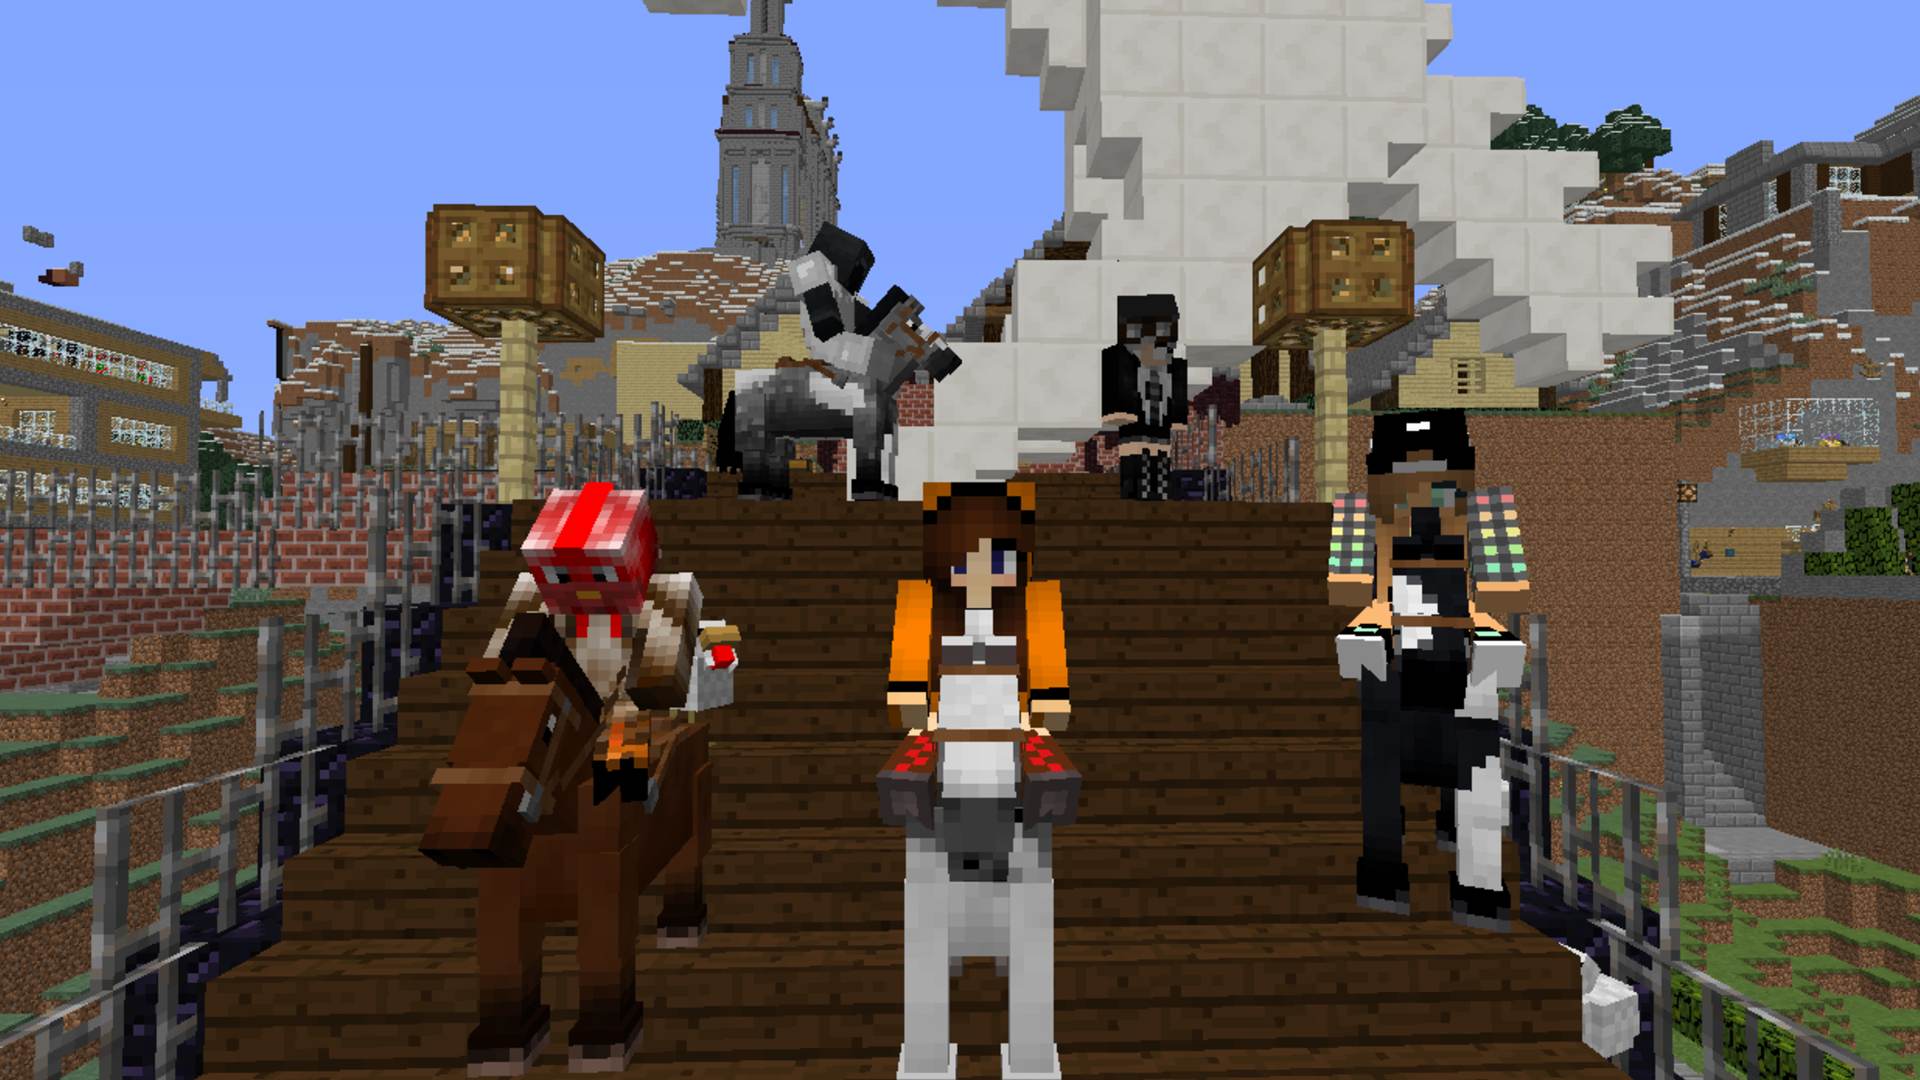 Best Minecraft servers: several players riding horses in Ranch n Craft.